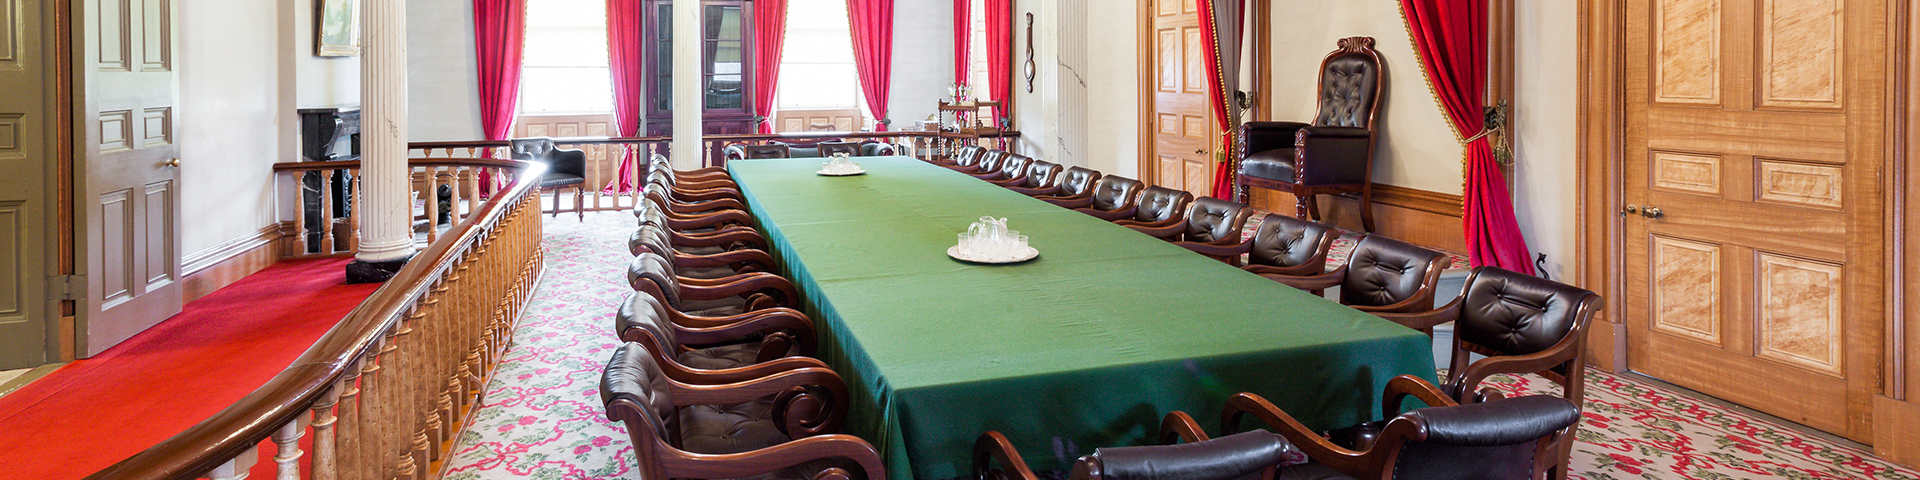 large meeting table inside province house